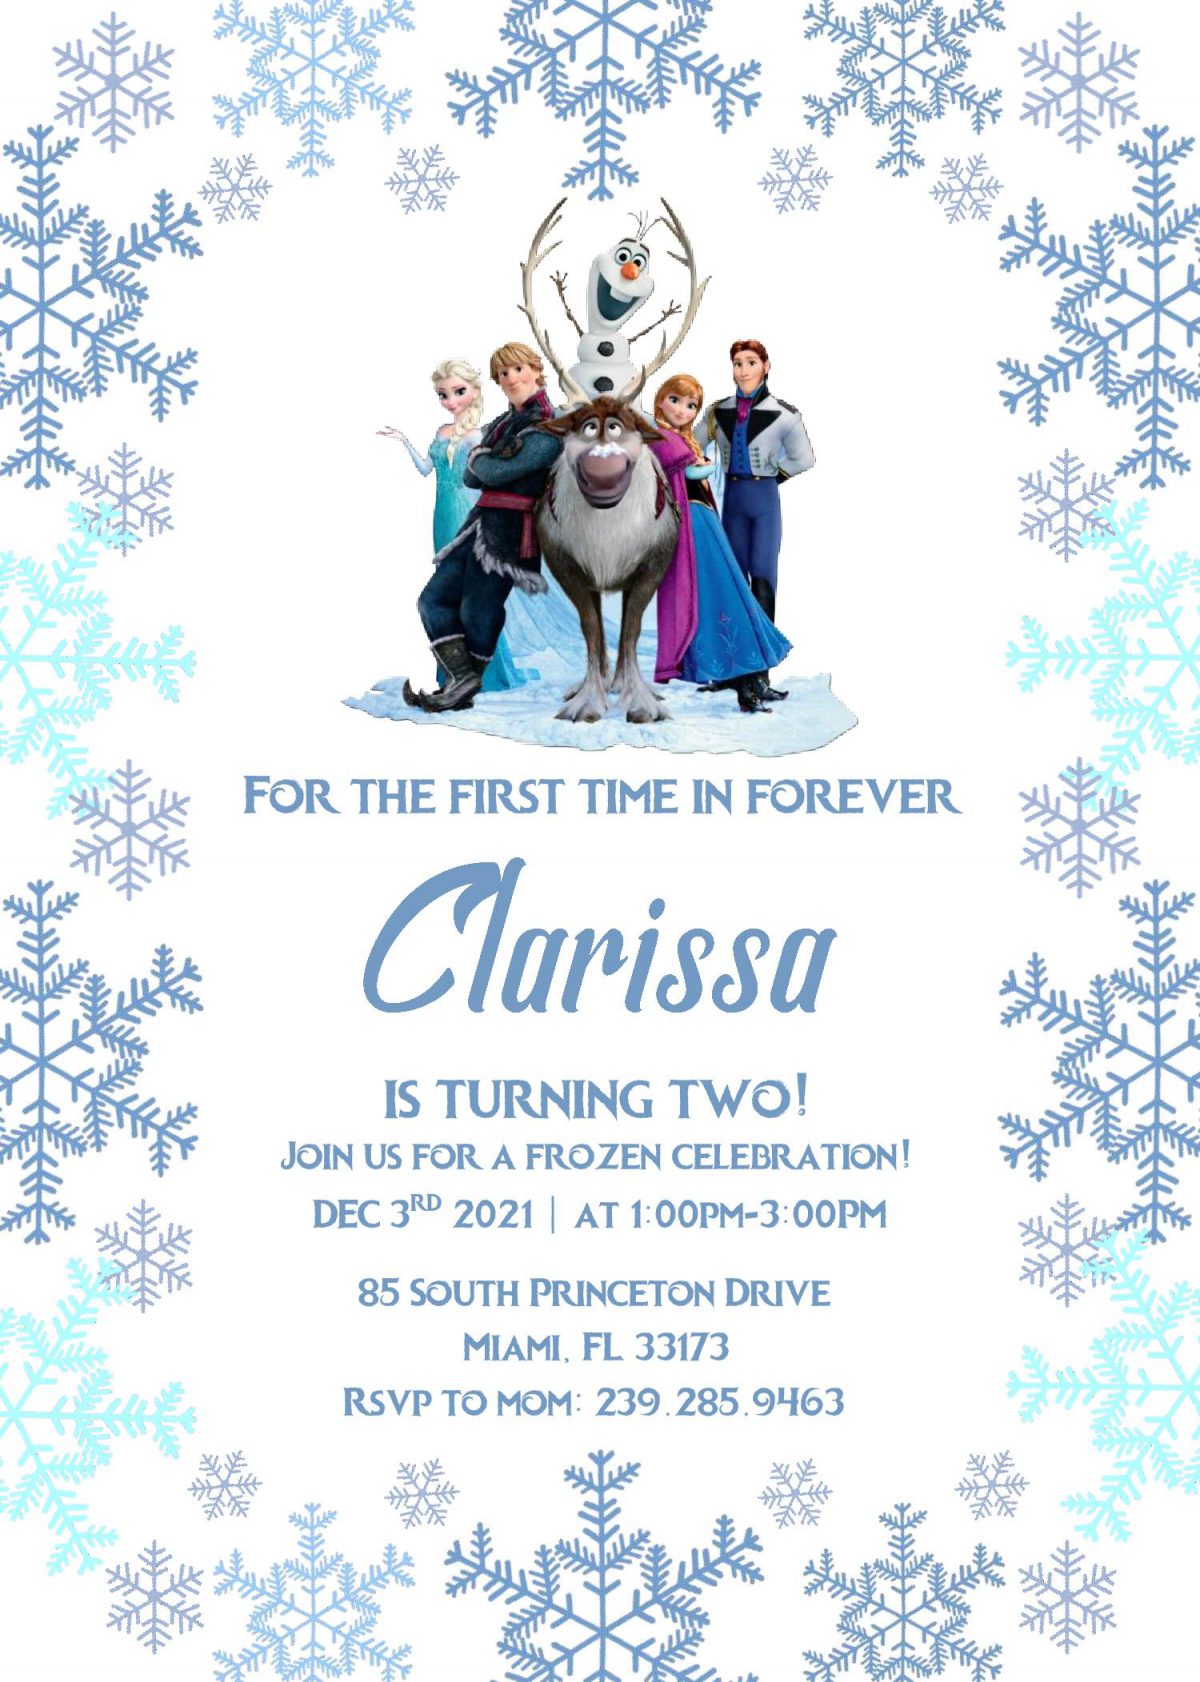 Frozen Invitation Templates - Editable With MS Word and has all frozen characters